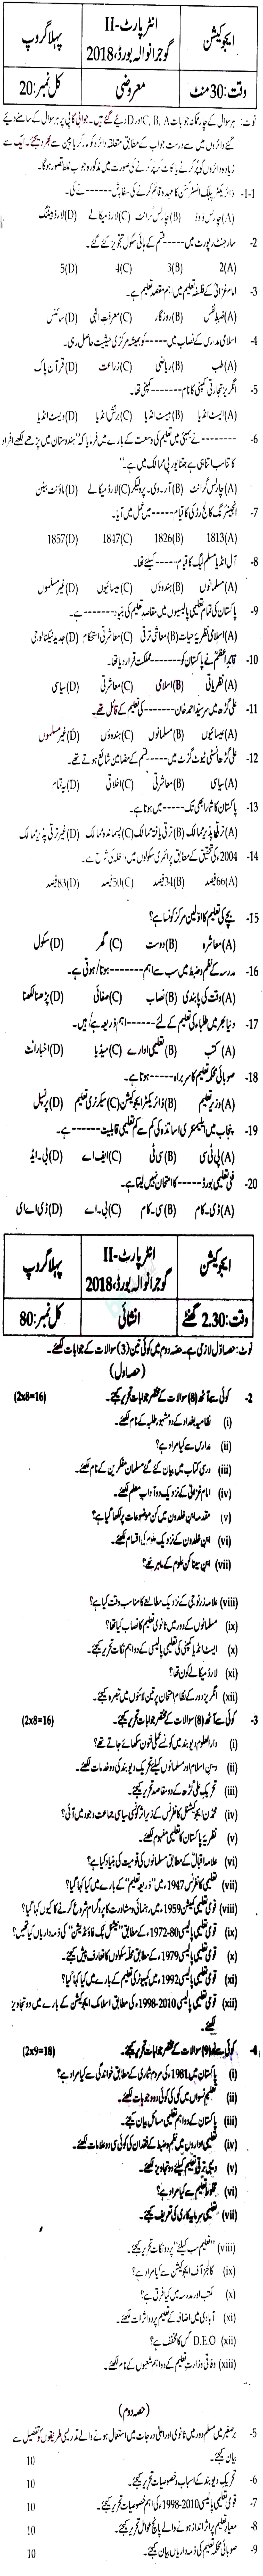 Education FA Part 2 Past Paper Group 1 BISE Gujranwala 2018